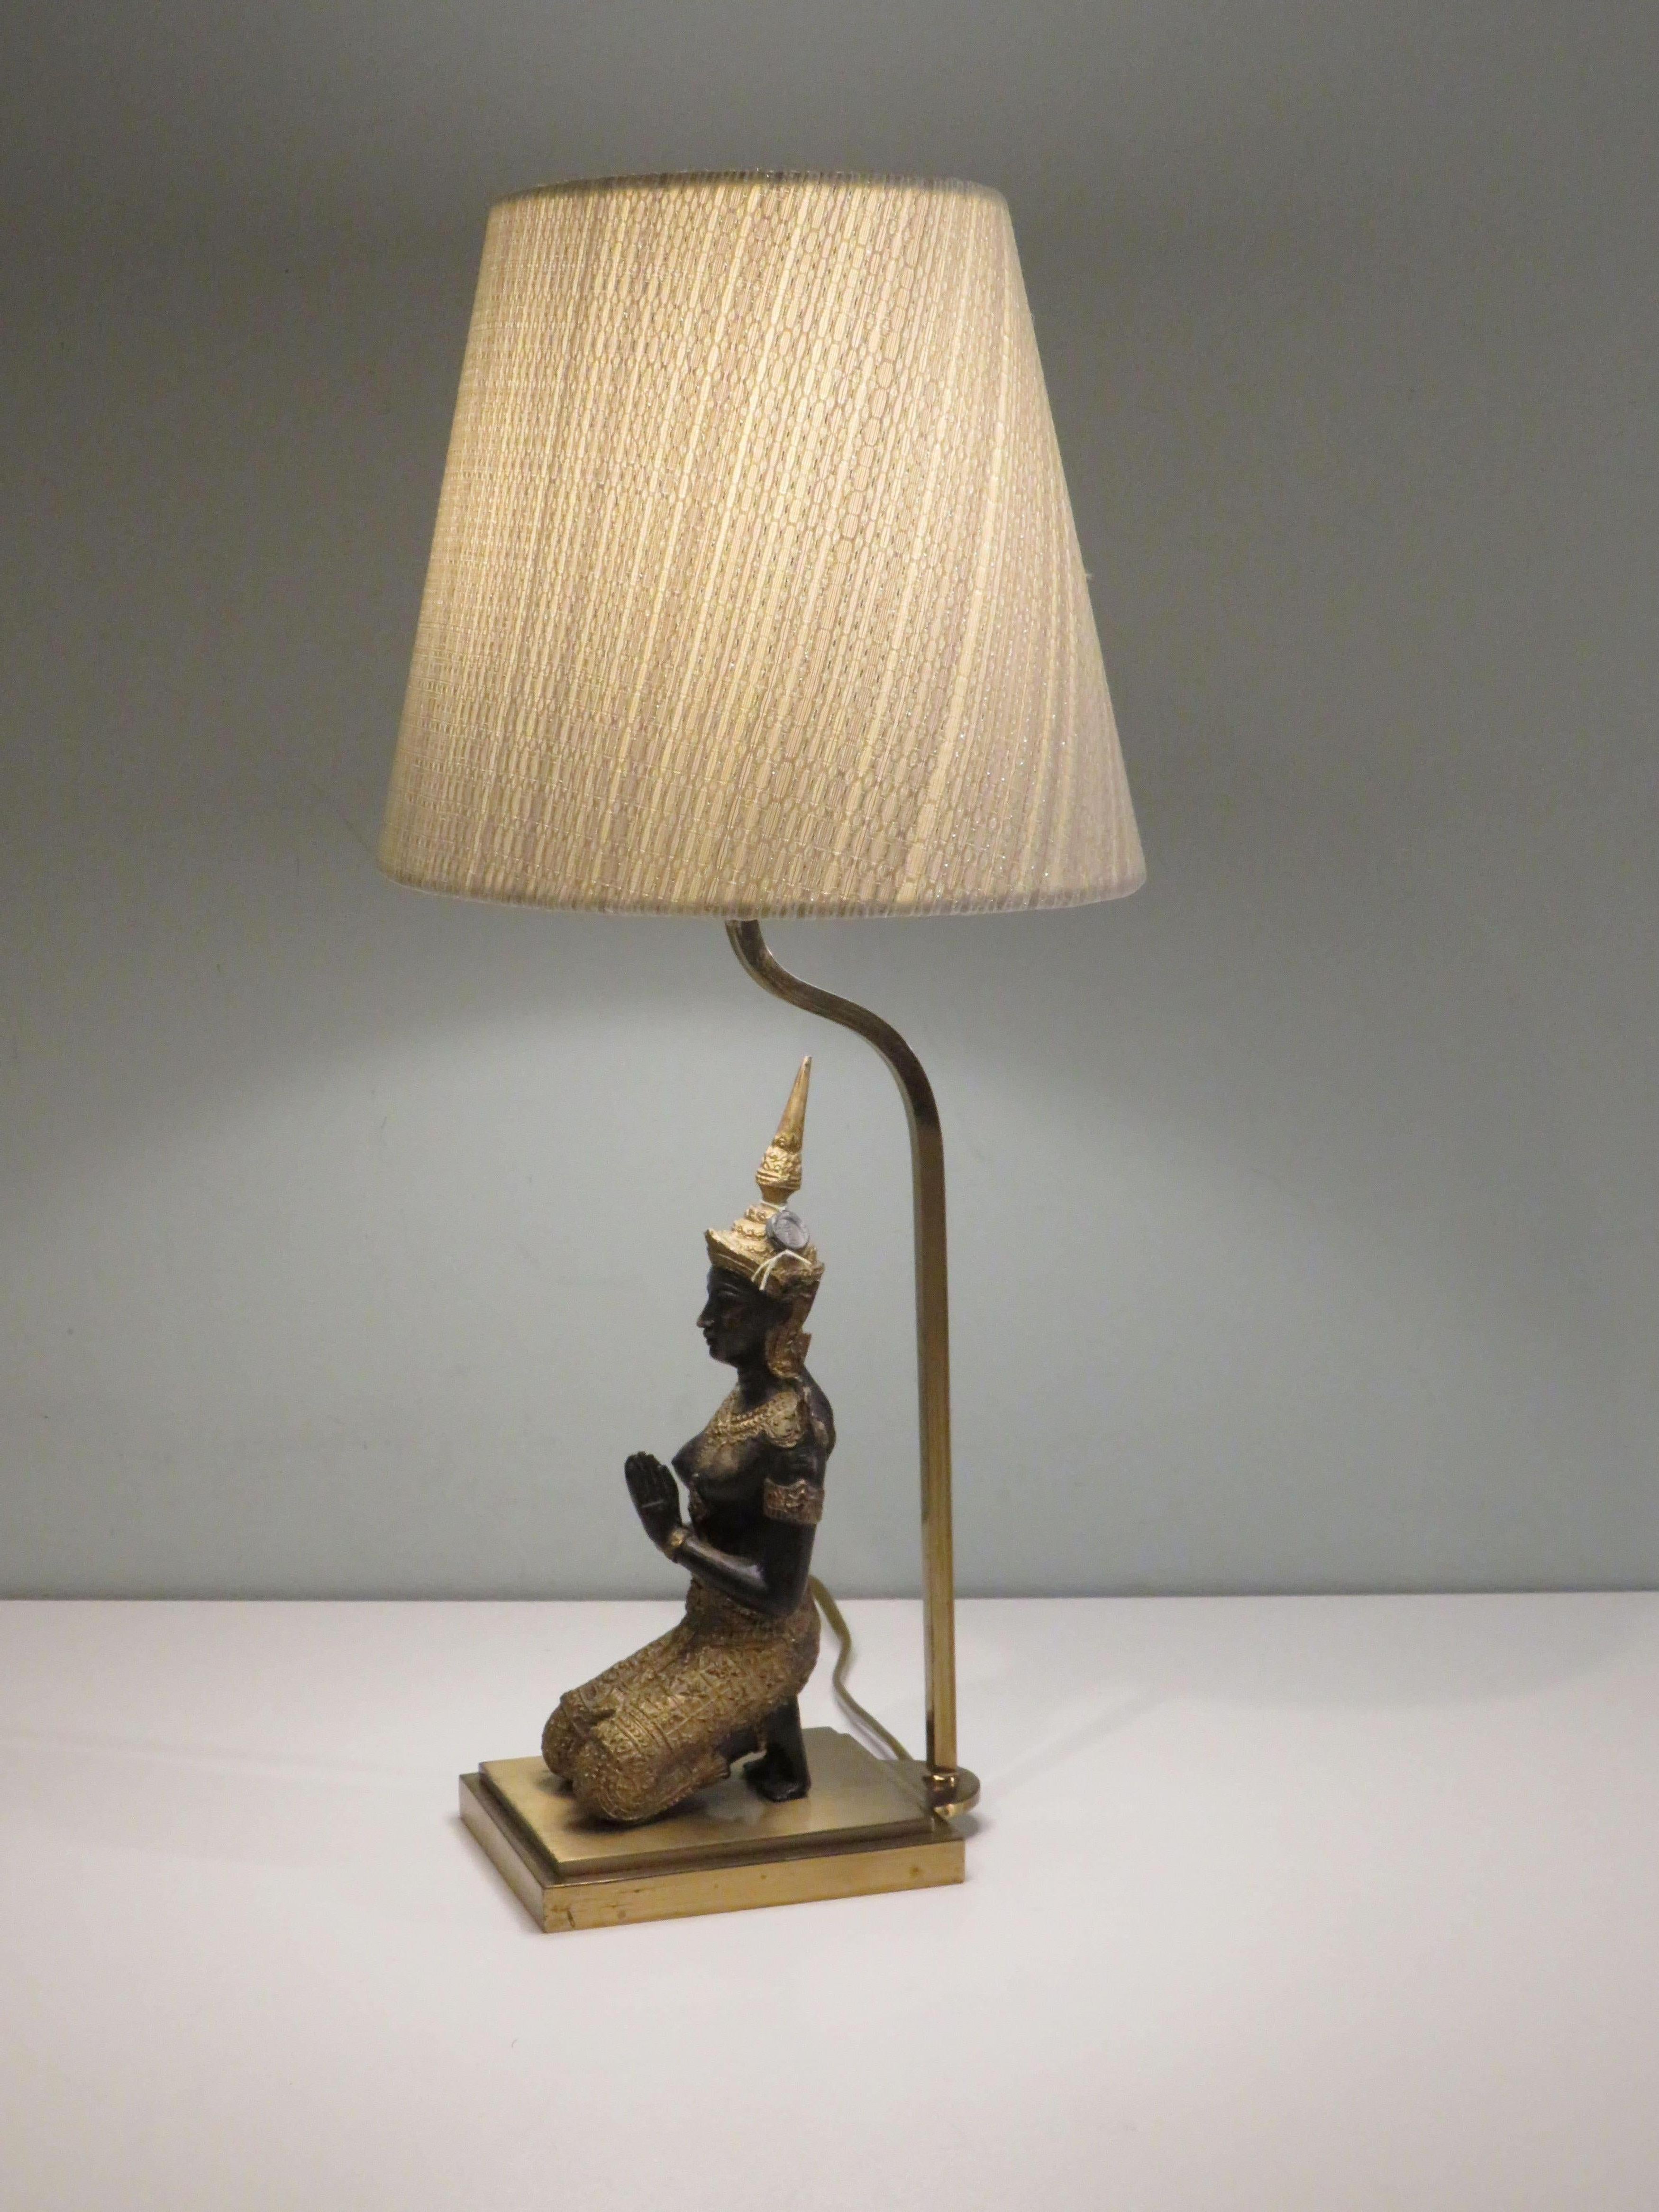 Elegant bronze Buddha on a brass base table lamp with a new custom-made, tapered oval lampshade in slightly shimmering ecru structure fabric.
The fixture is equipped with an E 27 lamp socket.
When delivered to the US, an adapter plug that conforms